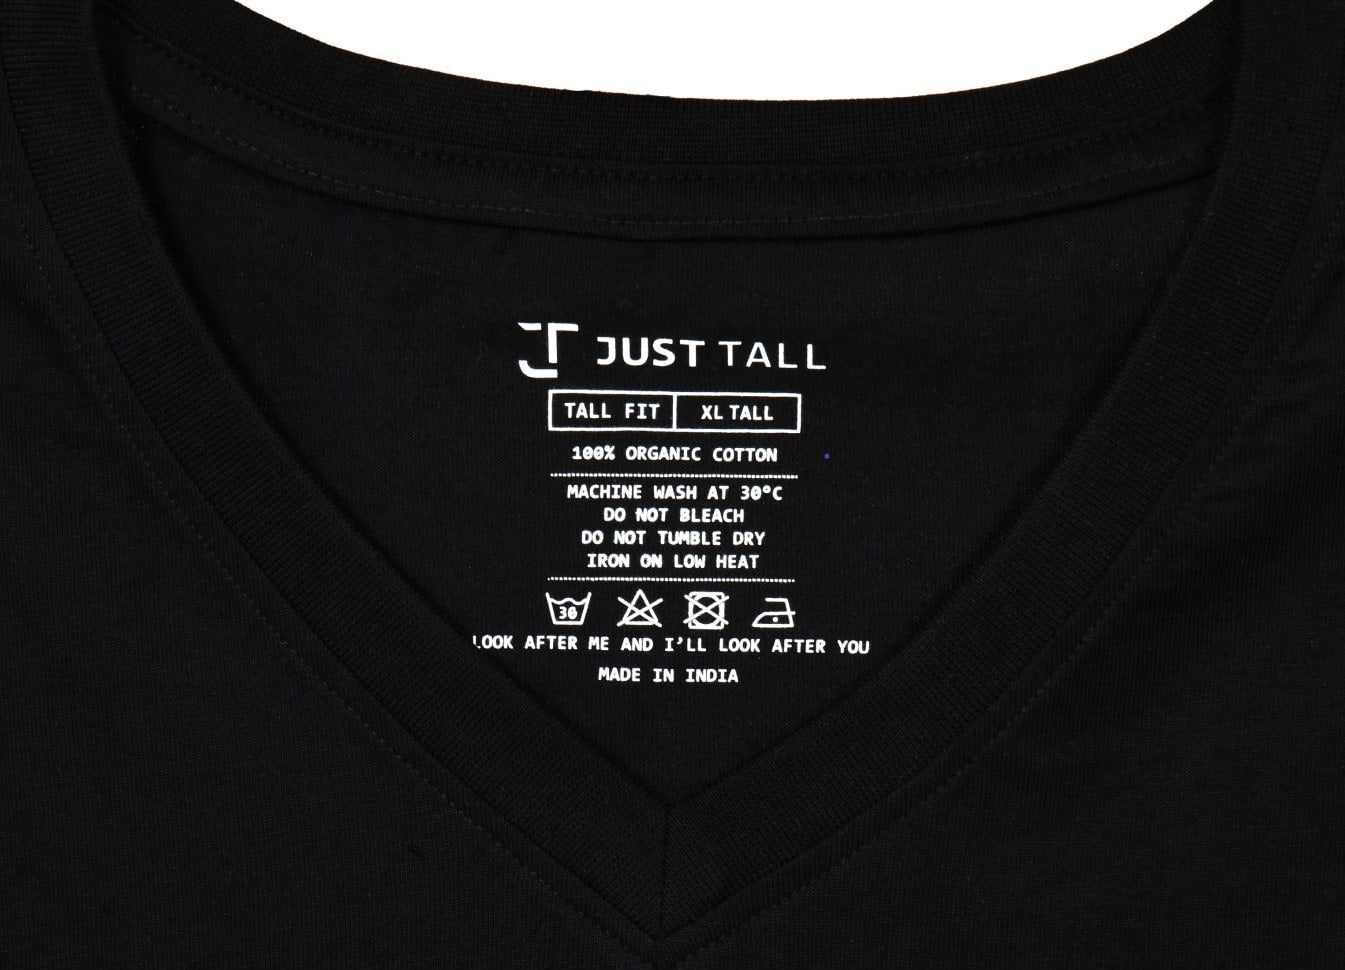 A close up of a tall V-neck and the Just Tall care instructions.